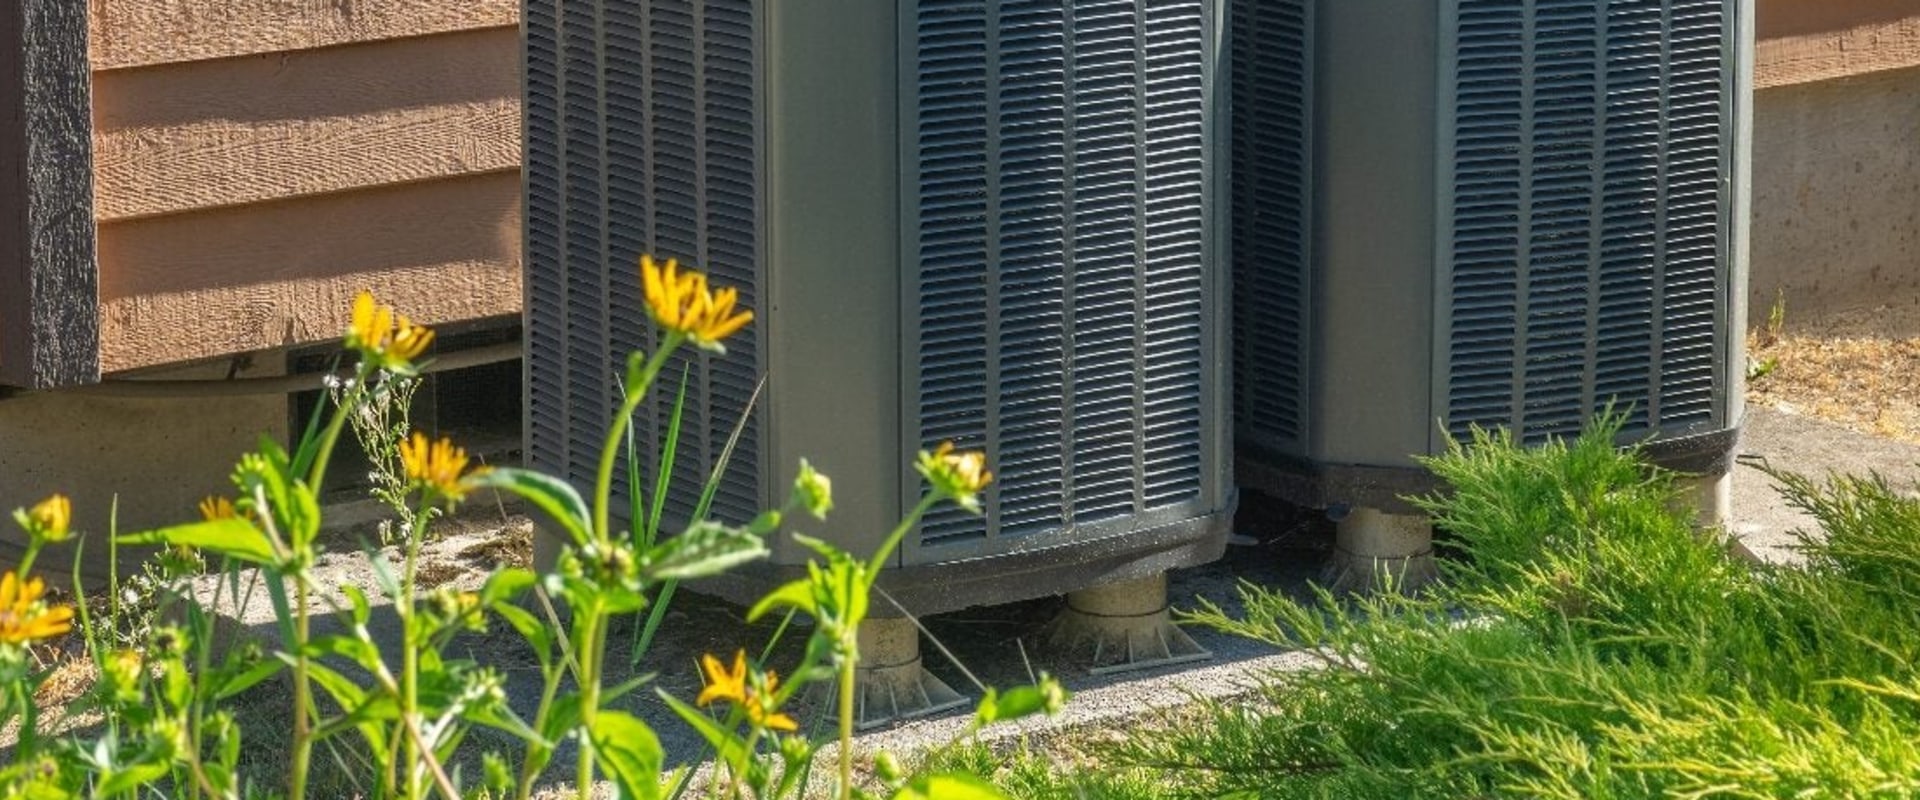 How much does an air conditioning service cost?